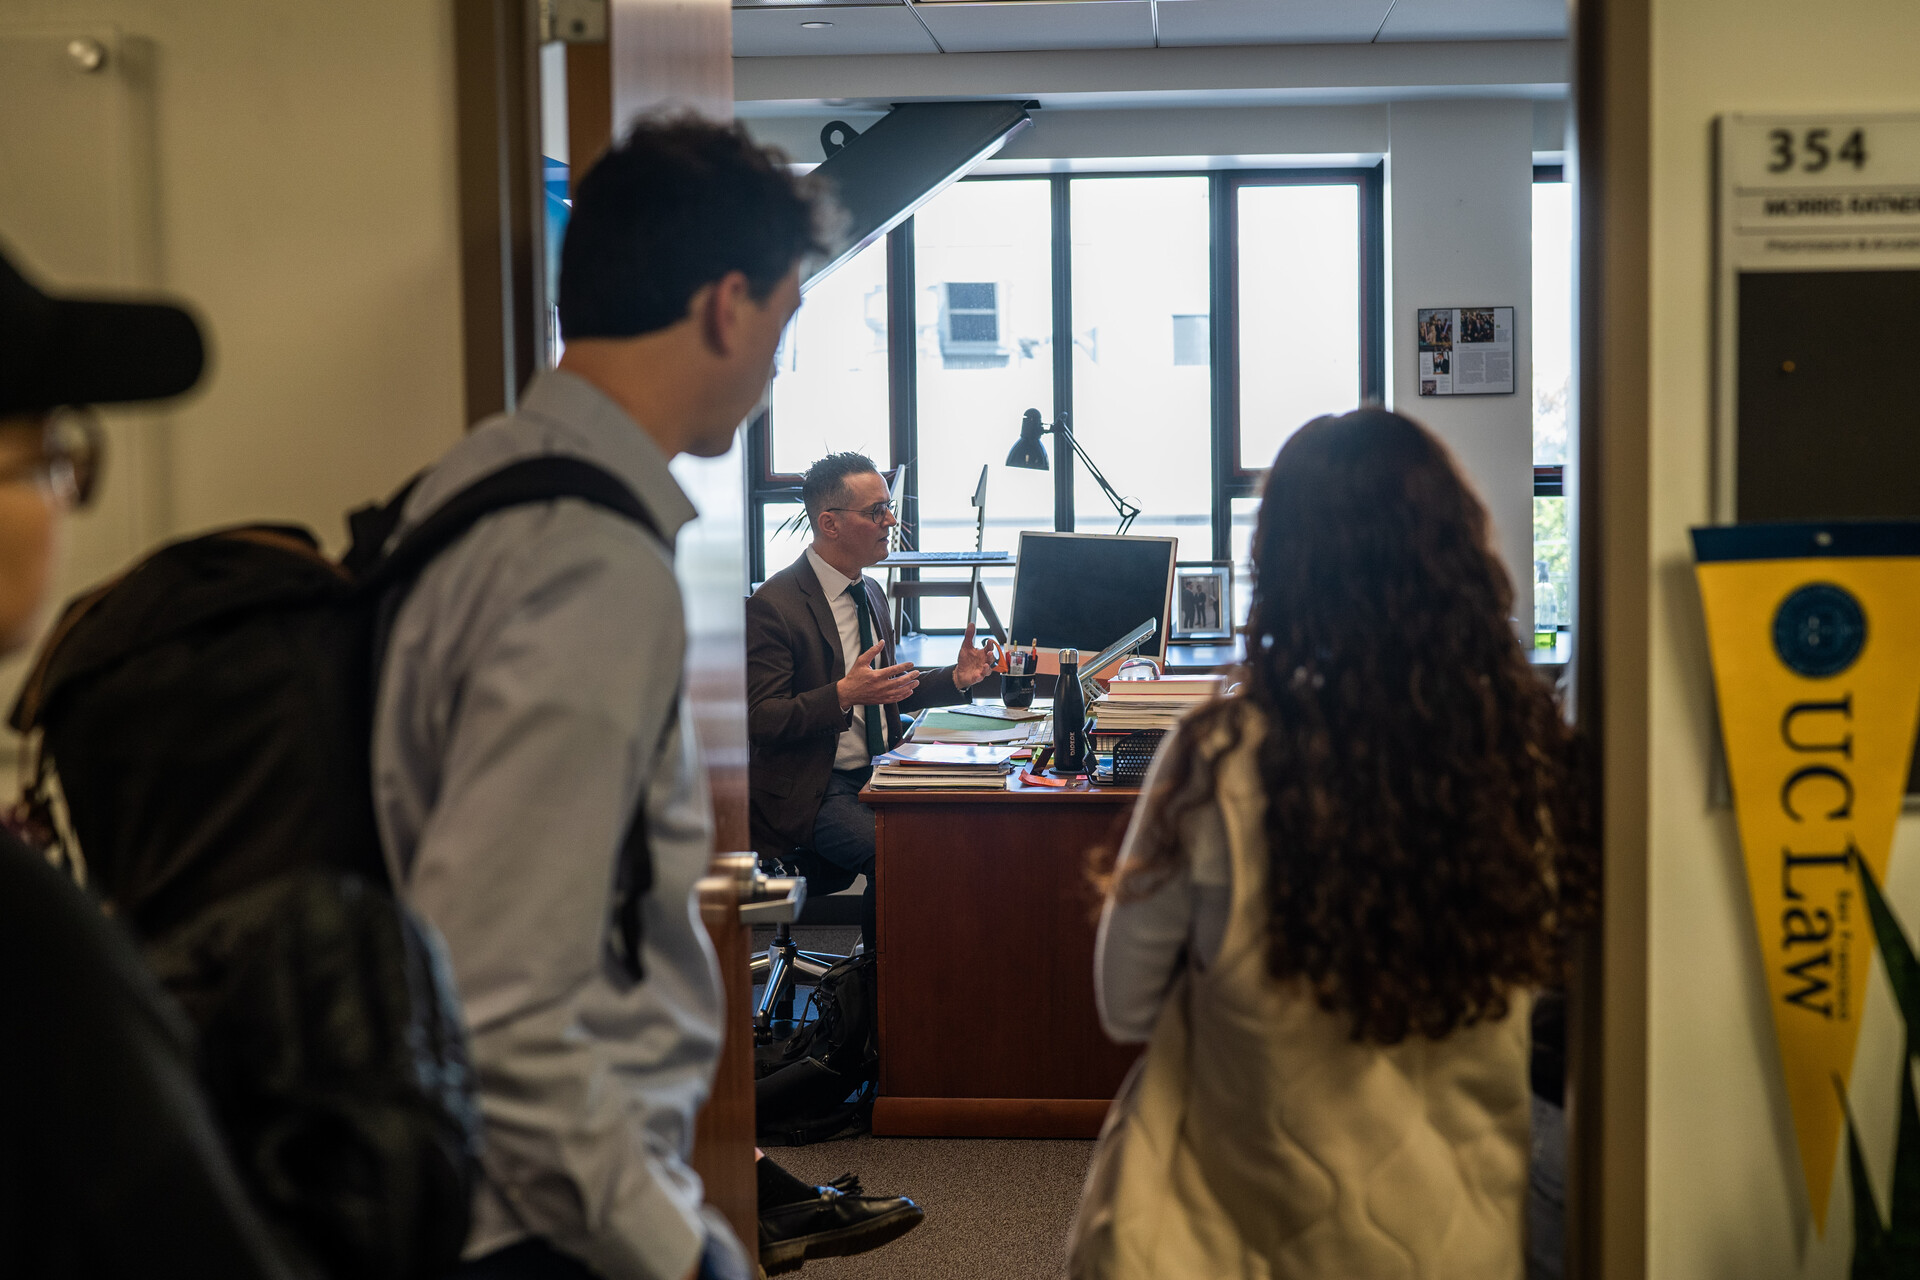 Two students, one male, the other female, stand on either side of a door with their backs to the camera, through the door we see a white man in a brown suit sitting behind a desk explaining something.